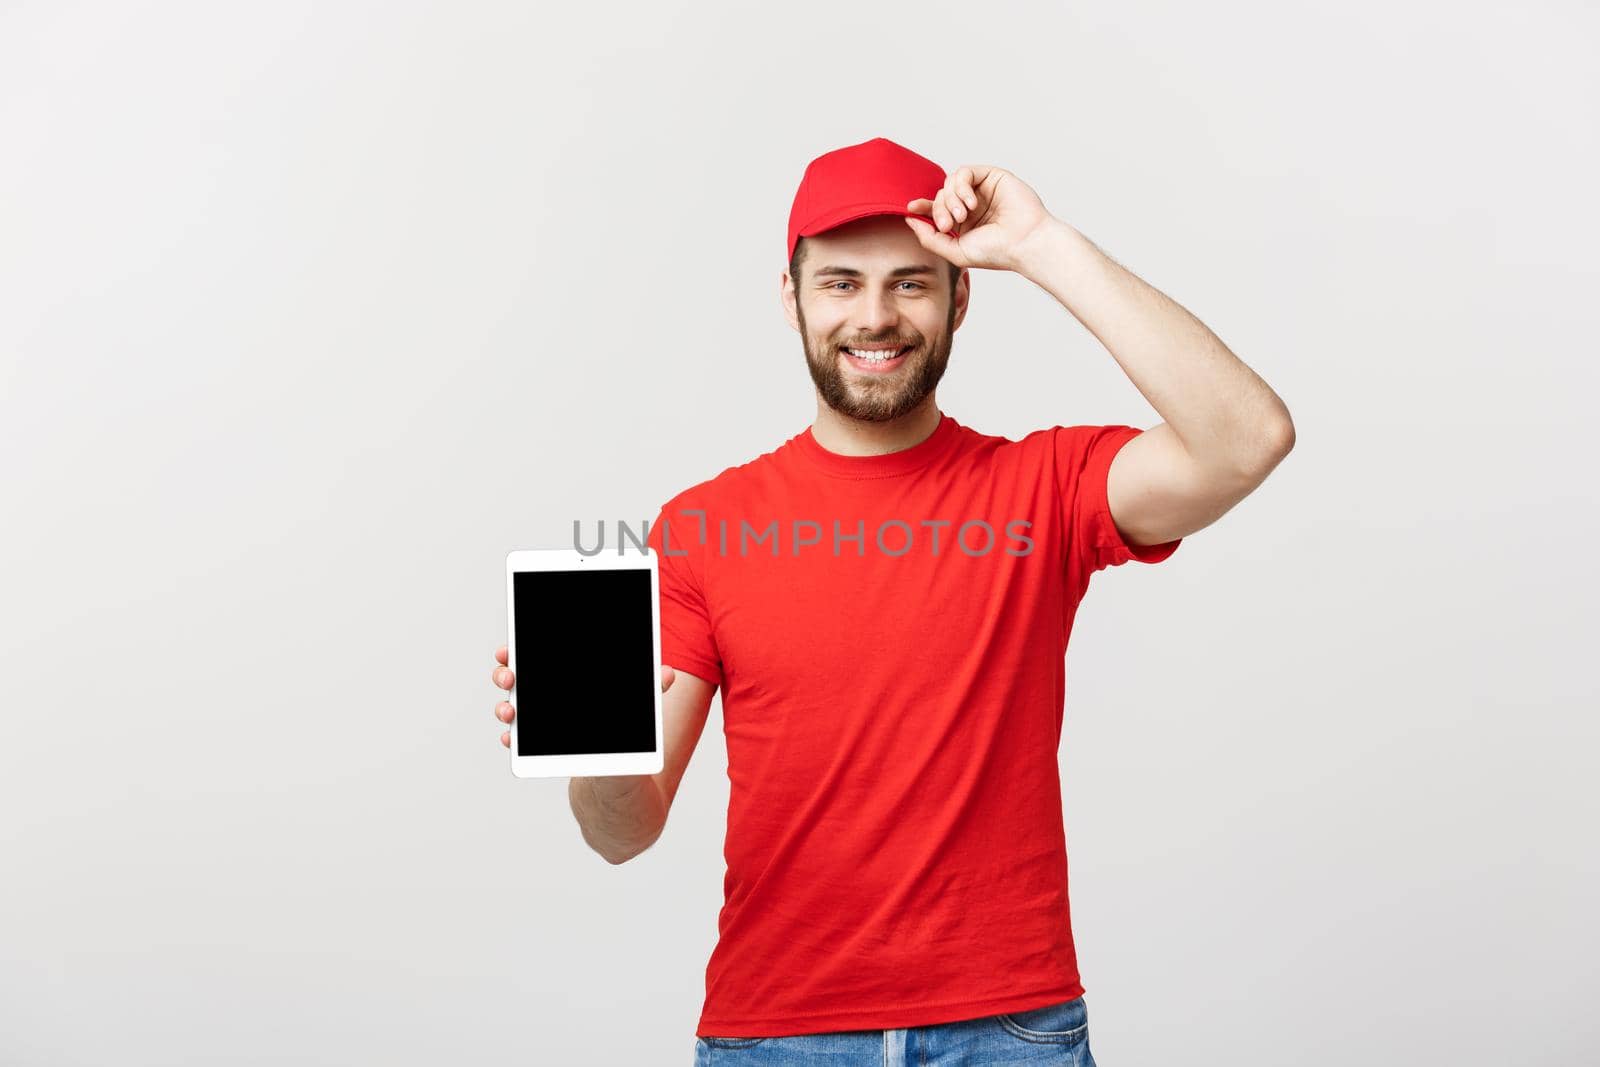 Online shopping, delivery, technology and lifestyle concept - smiling delivery man presenting tablet in his hand showing something. Isolated over white studio background